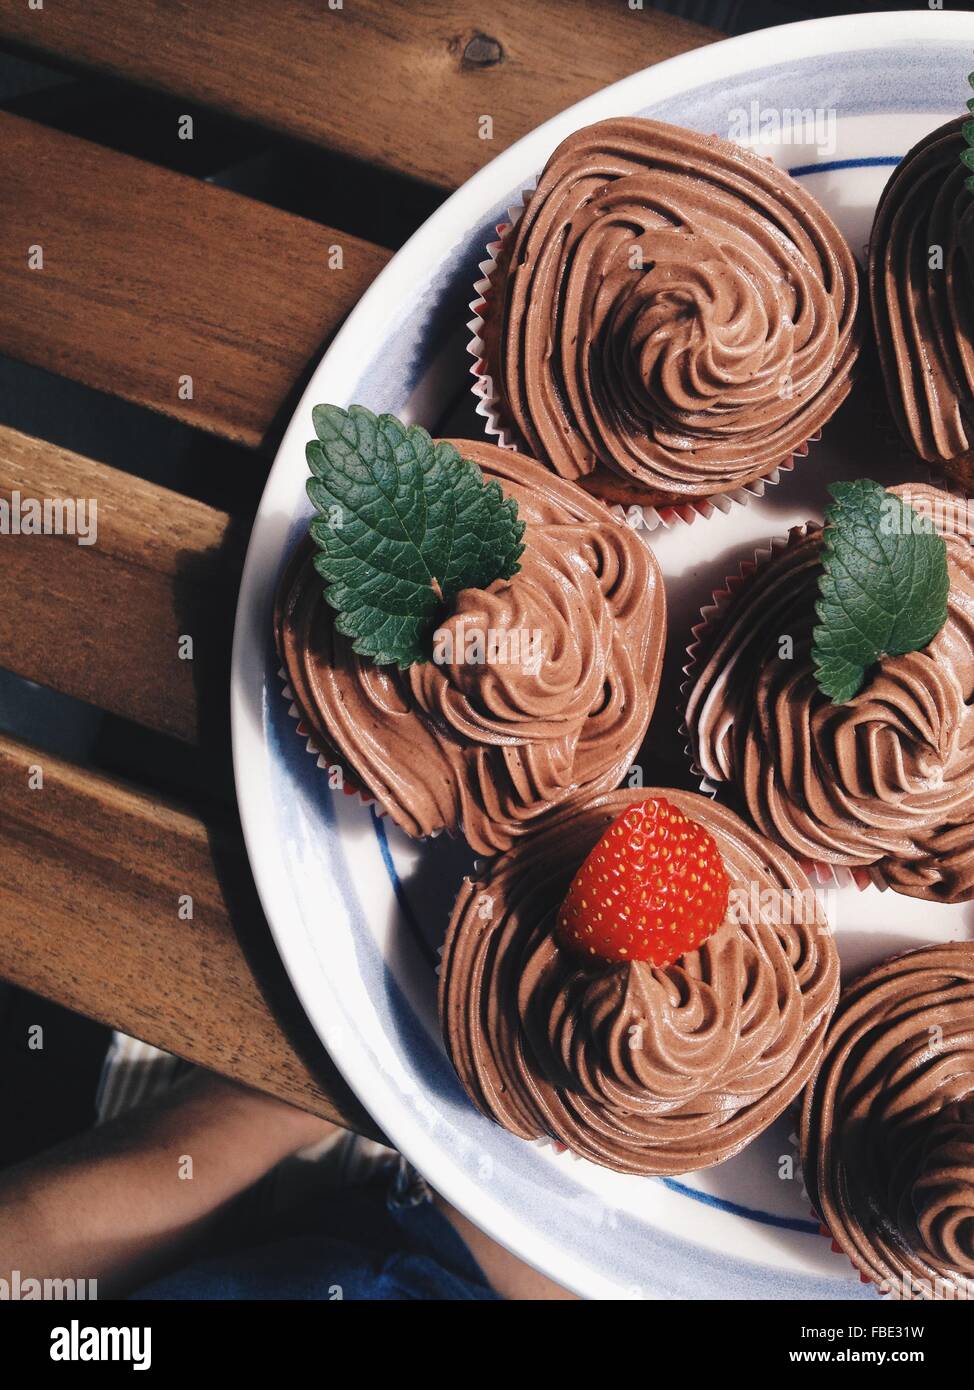 High Angle View Of Chocolate Cupcakes With Swirly Icing In Plate Stock Photo